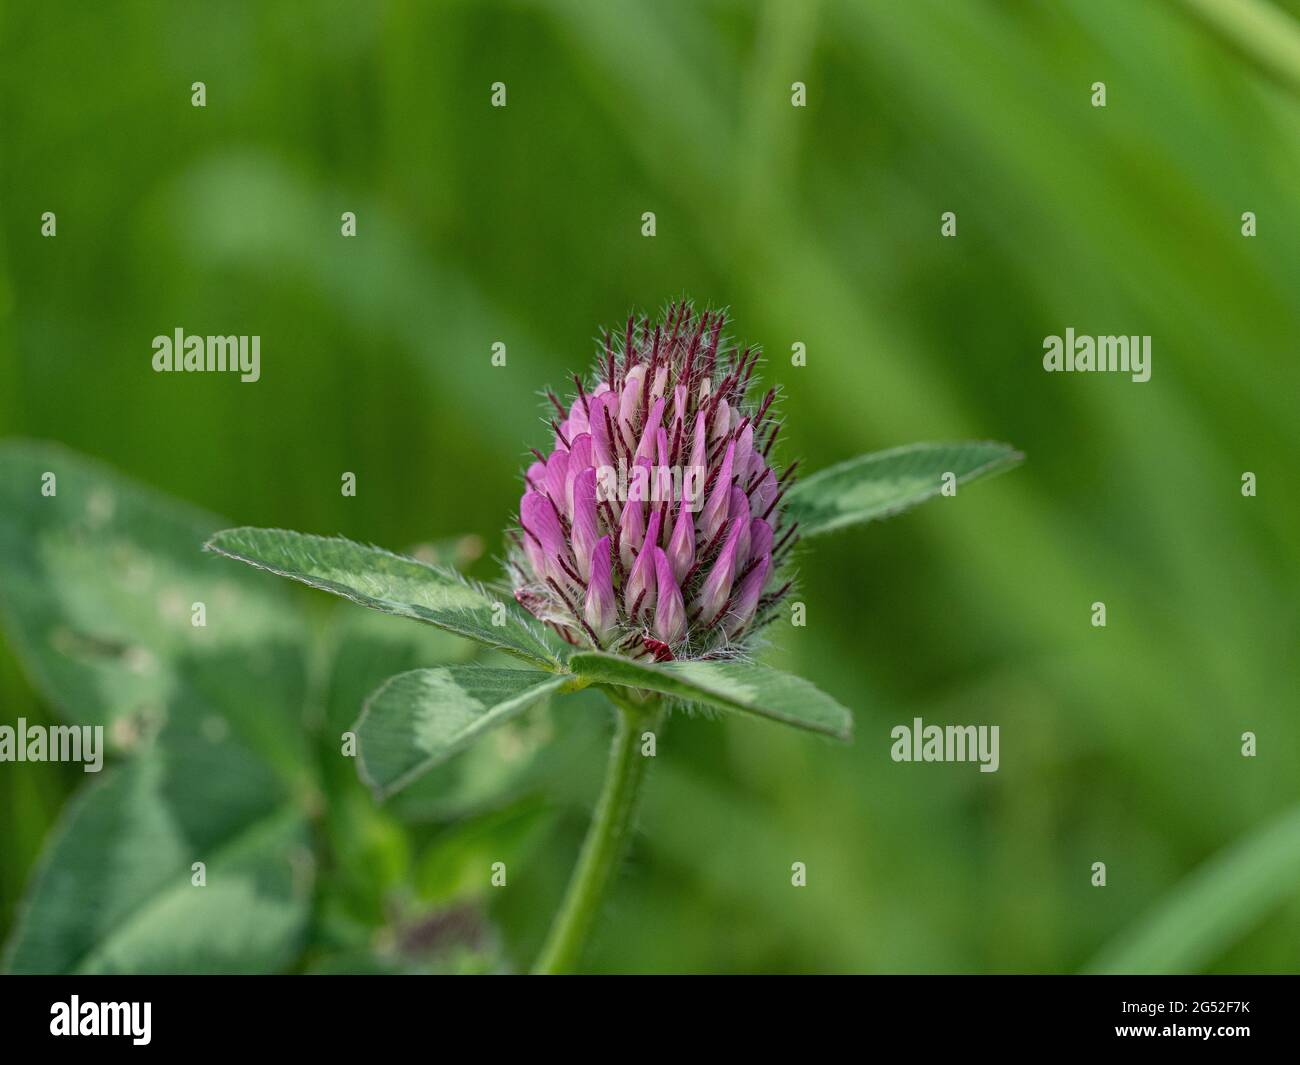 A close up of s single flowerhead of red clover Trifolium pratense Stock Photo